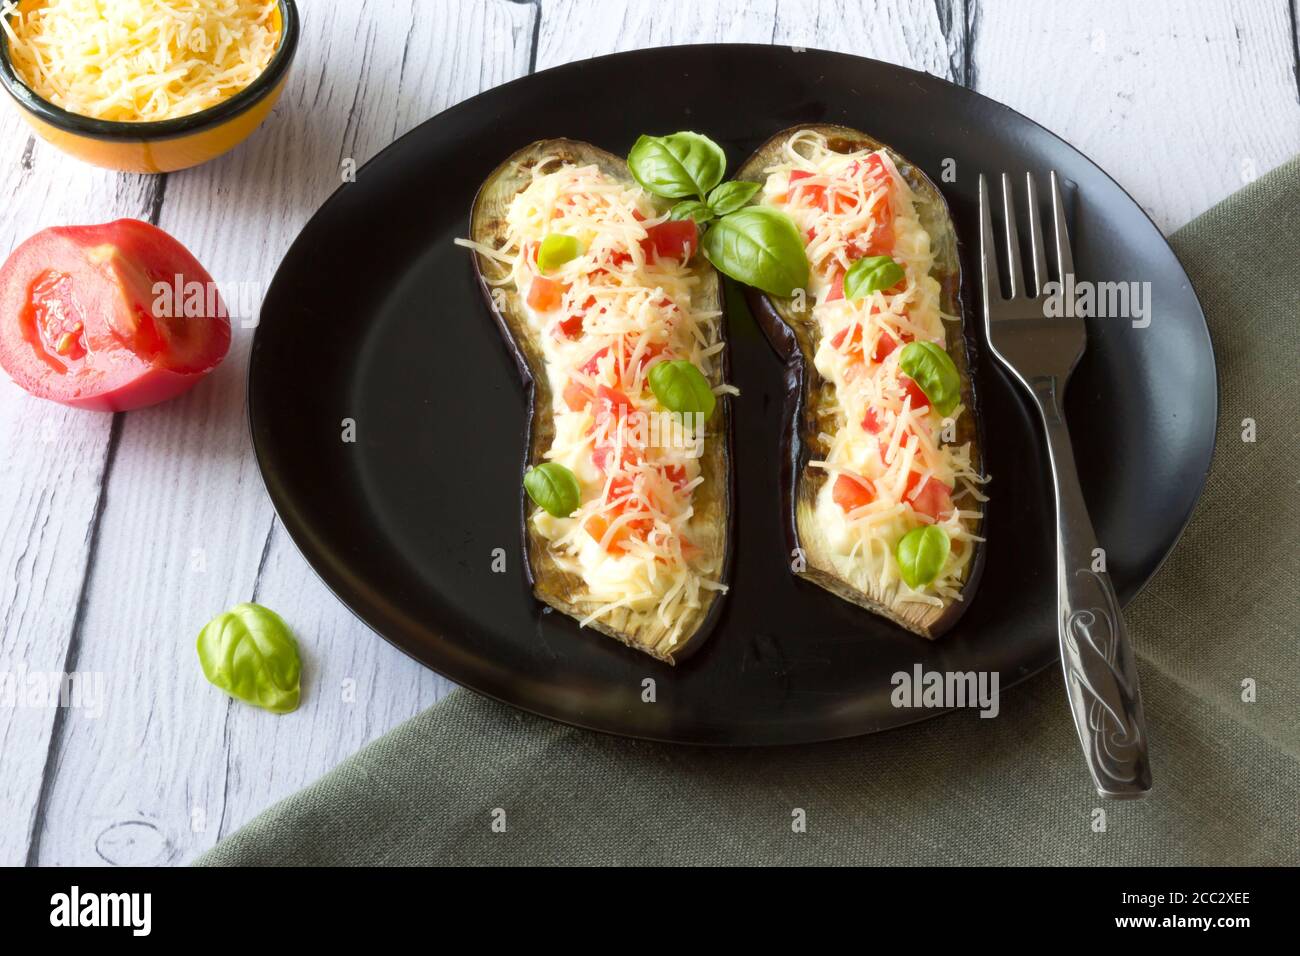 Eggplant stuffed with tomatoes, grated cheese and cranberries, garnished with Basil on a dark plate over gray slate Stock Photo